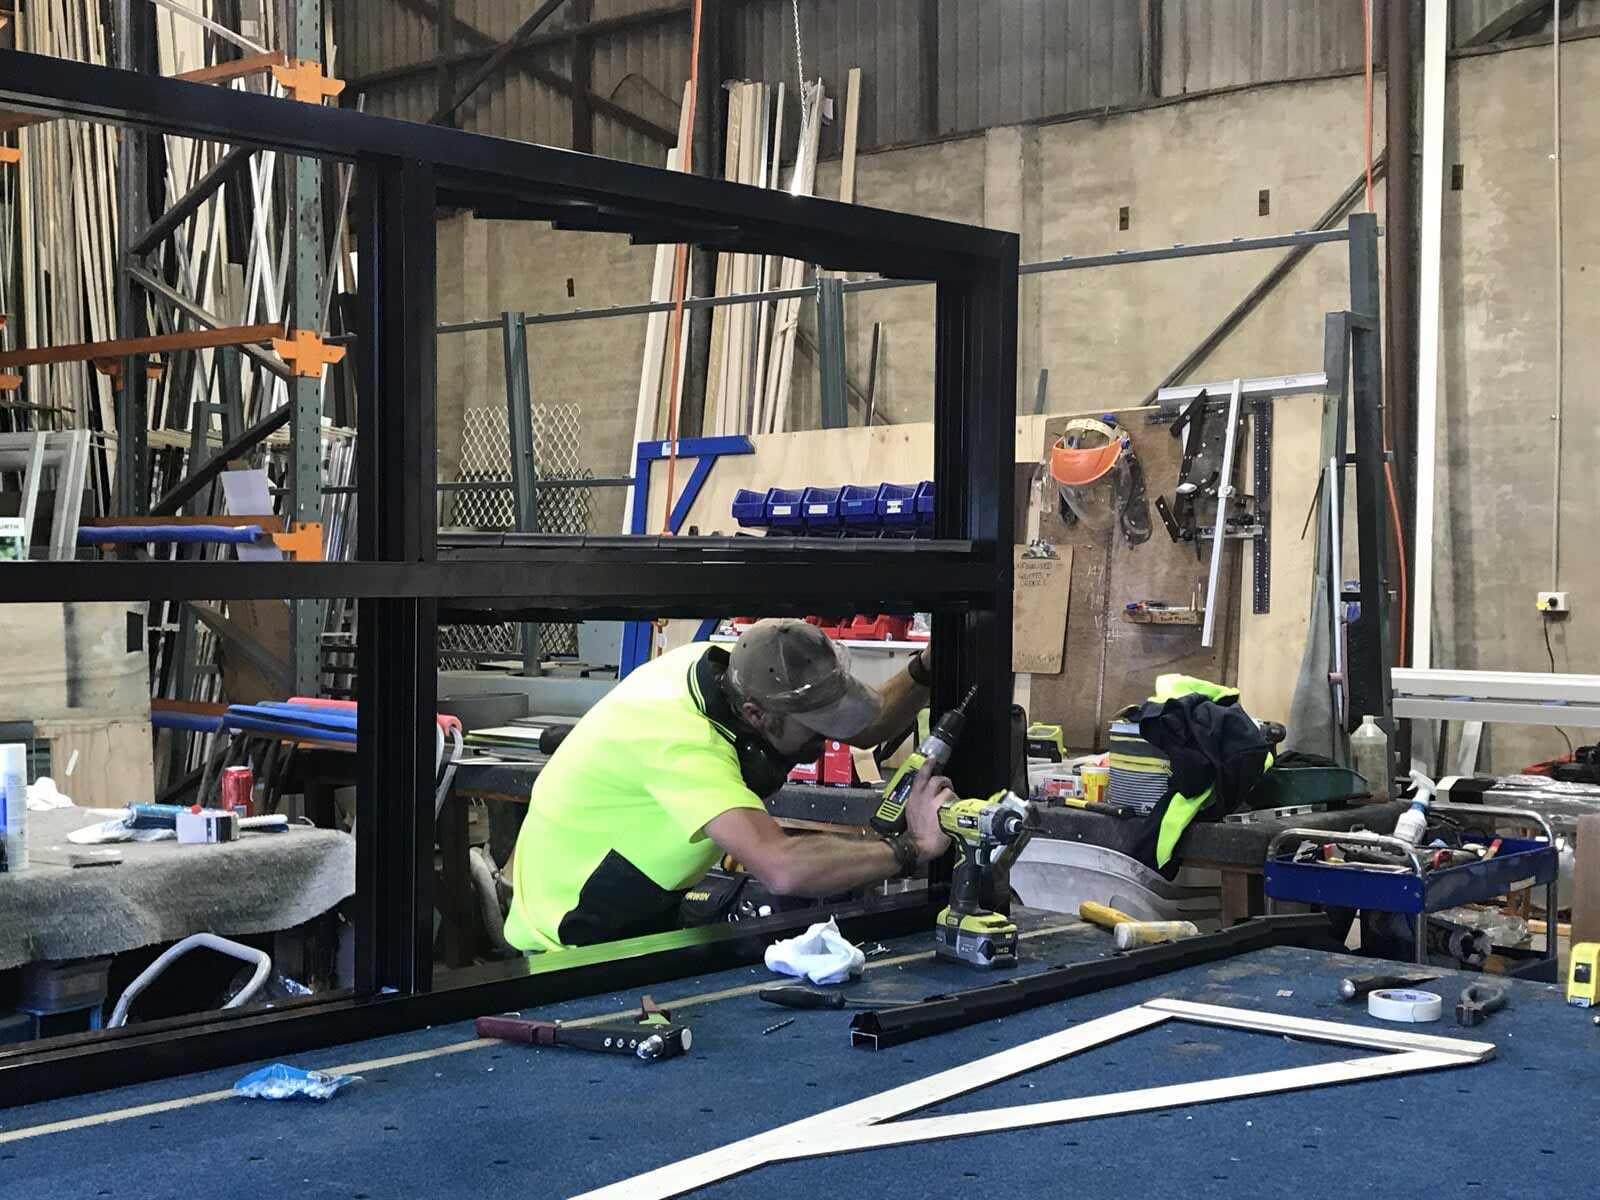 Commercial glass making 2 — Installing, repairing and manufacturing glass in Cessnock, NSW